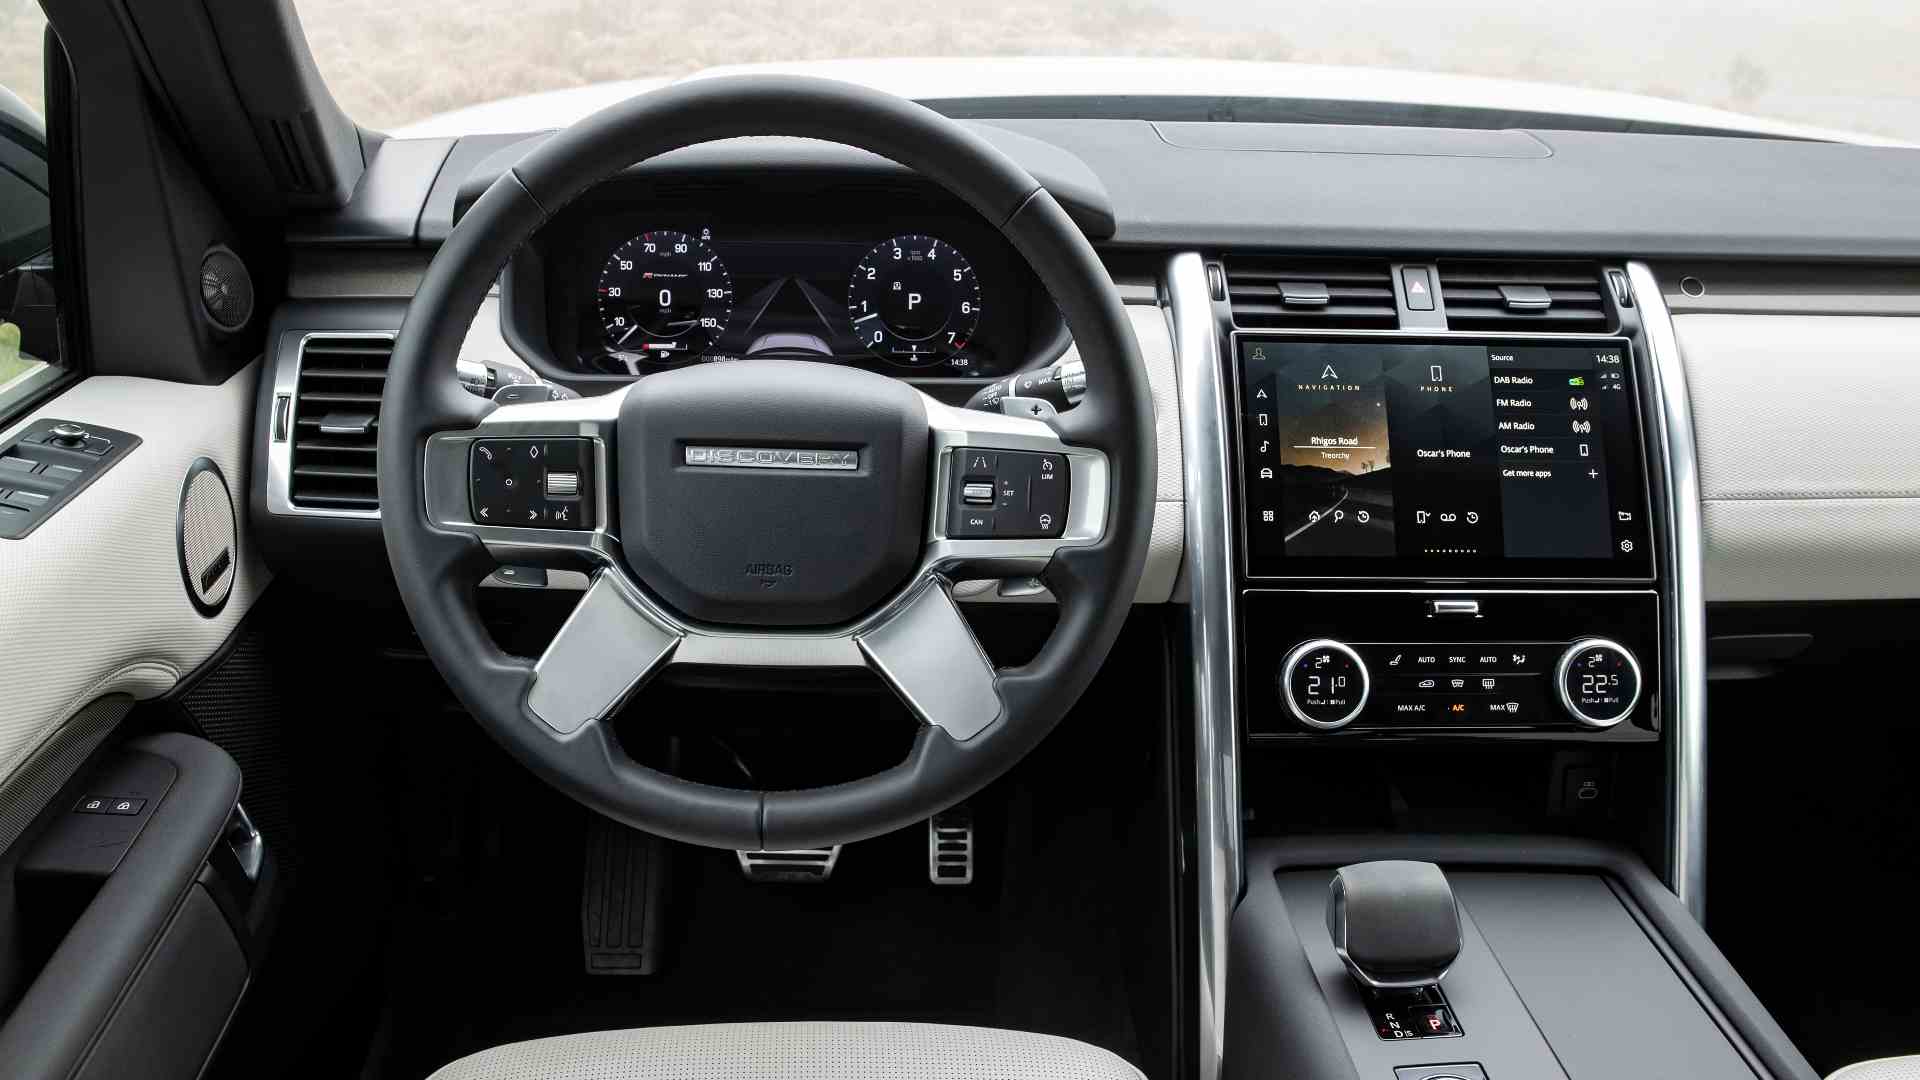 11.4-inch Pivi Pro infotainment system is new for the 2021 Land Rover Discovery. Image: Land Rover